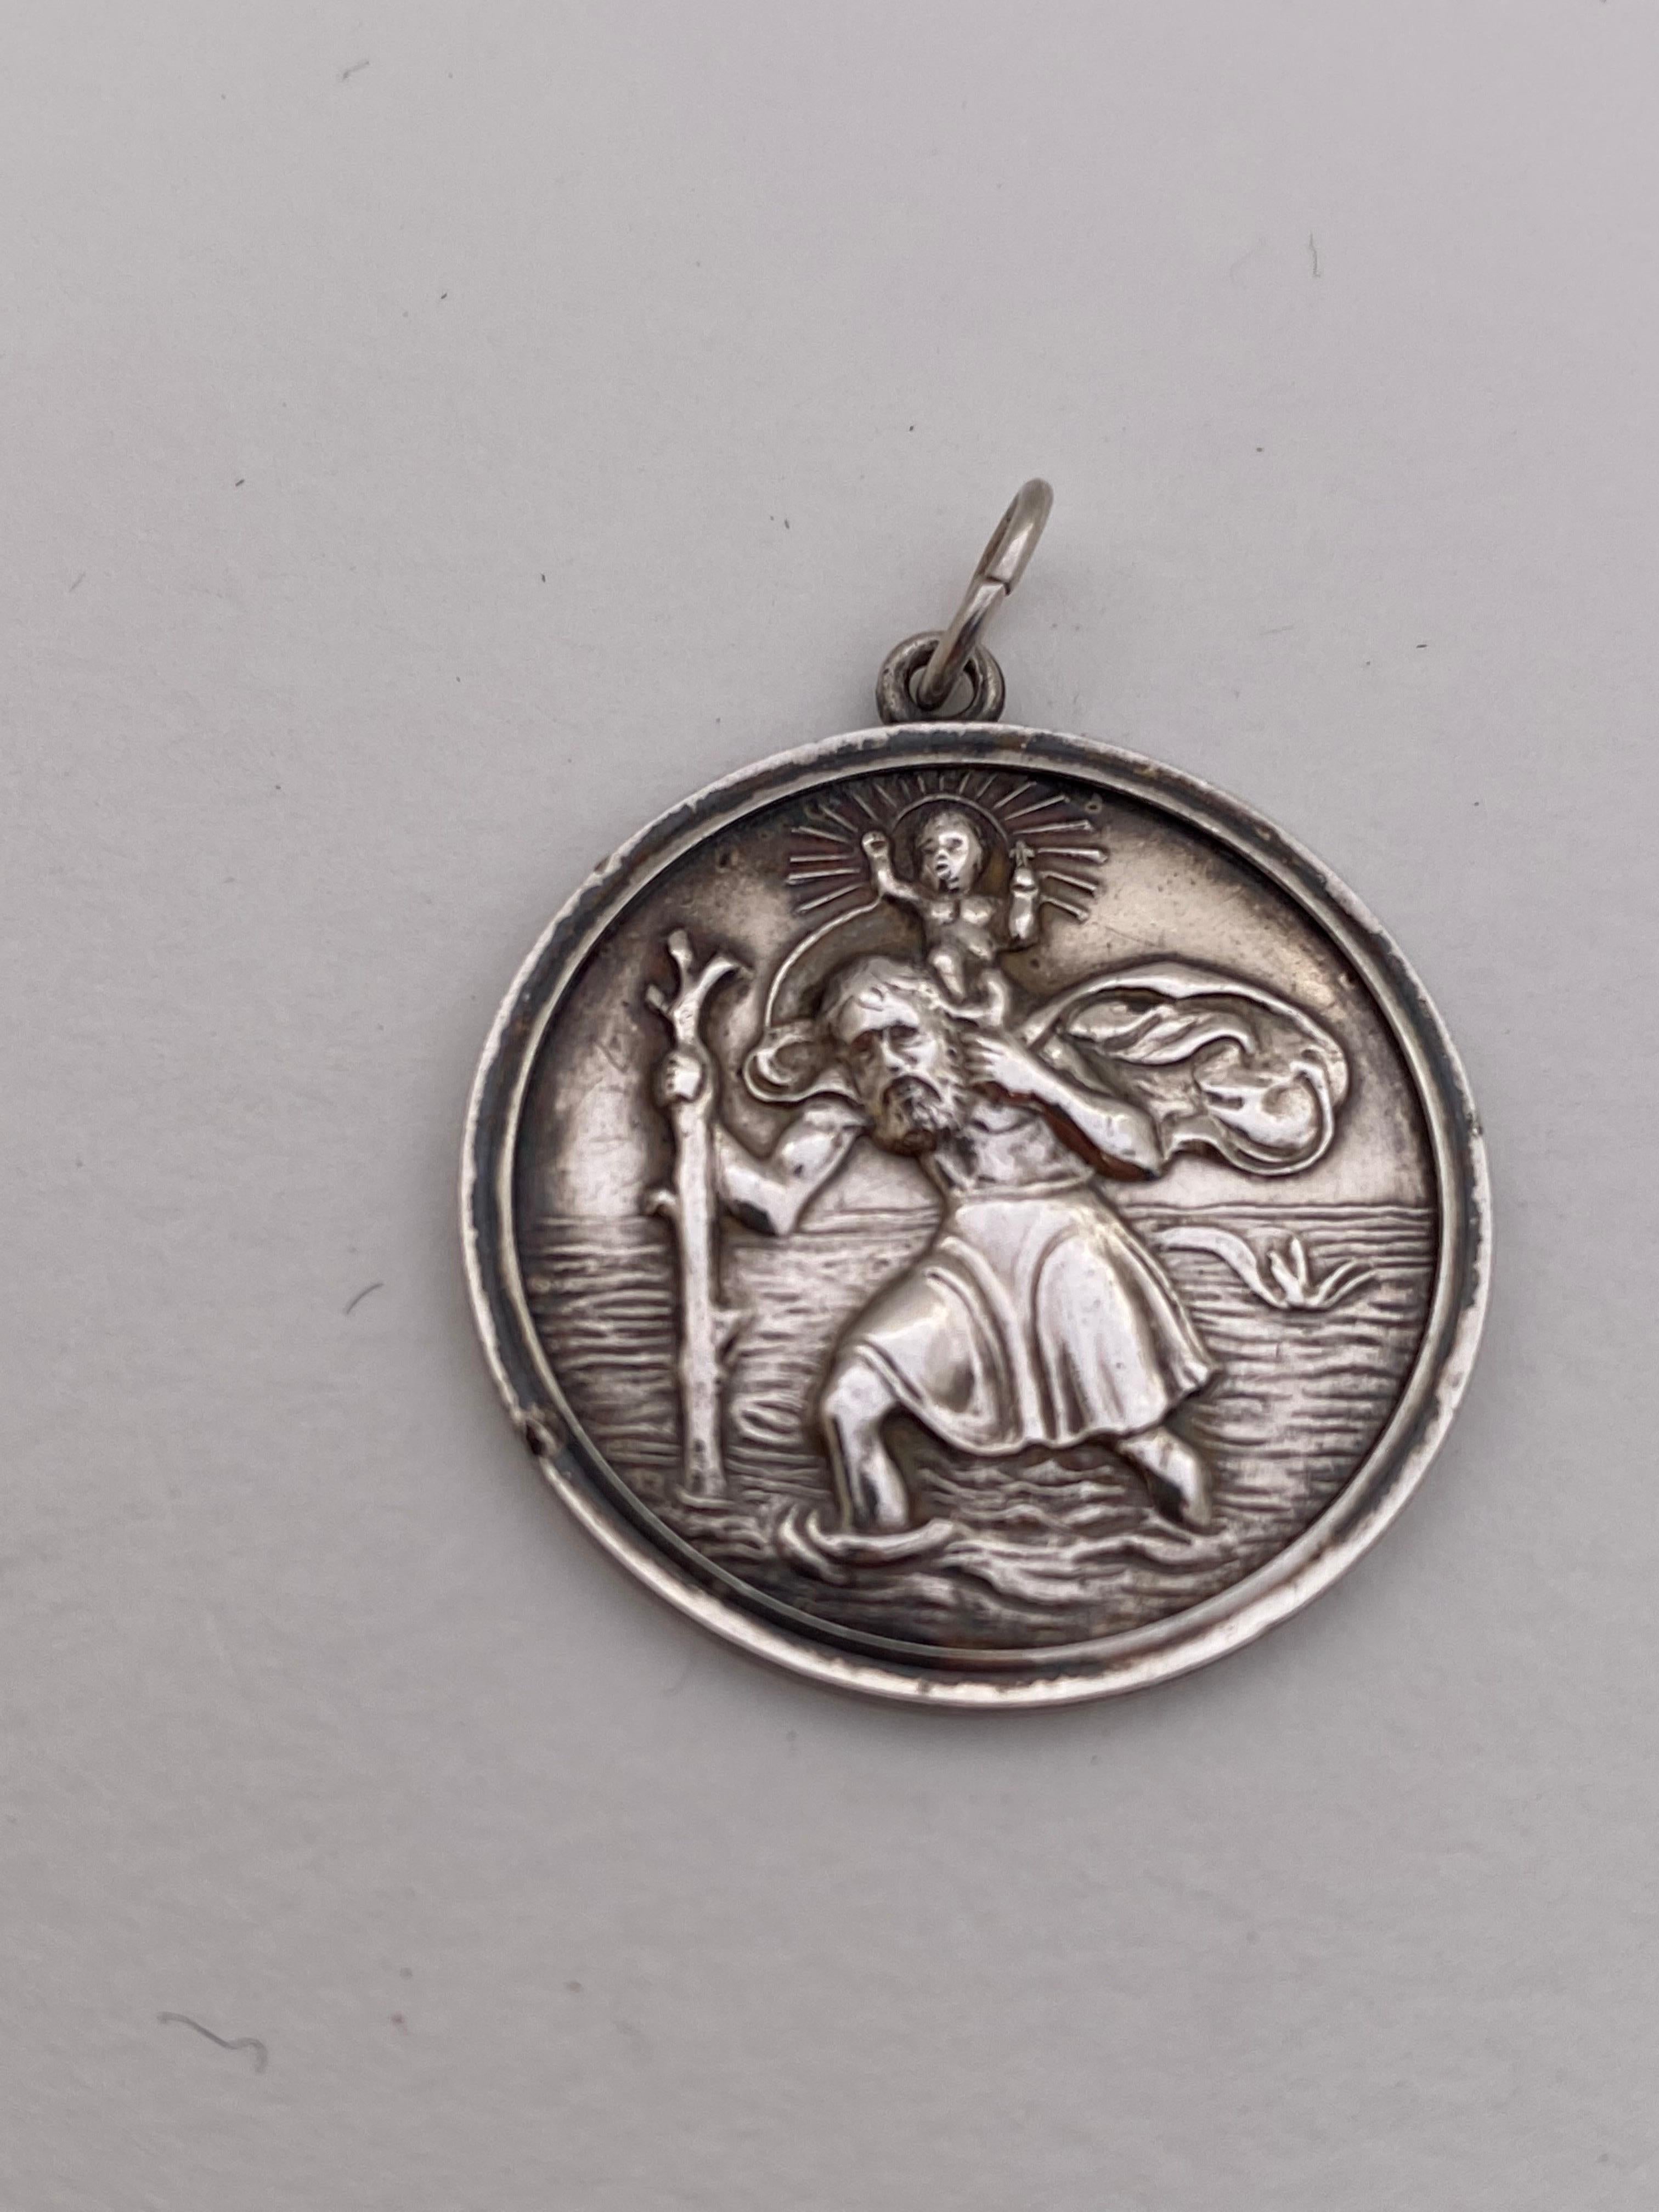 This beautiful piece is in good condition. Visible signs go ageing and wear with light marks on the surface as shown. It measured 25mm diameter . Please study the images carefully as form part of the description.